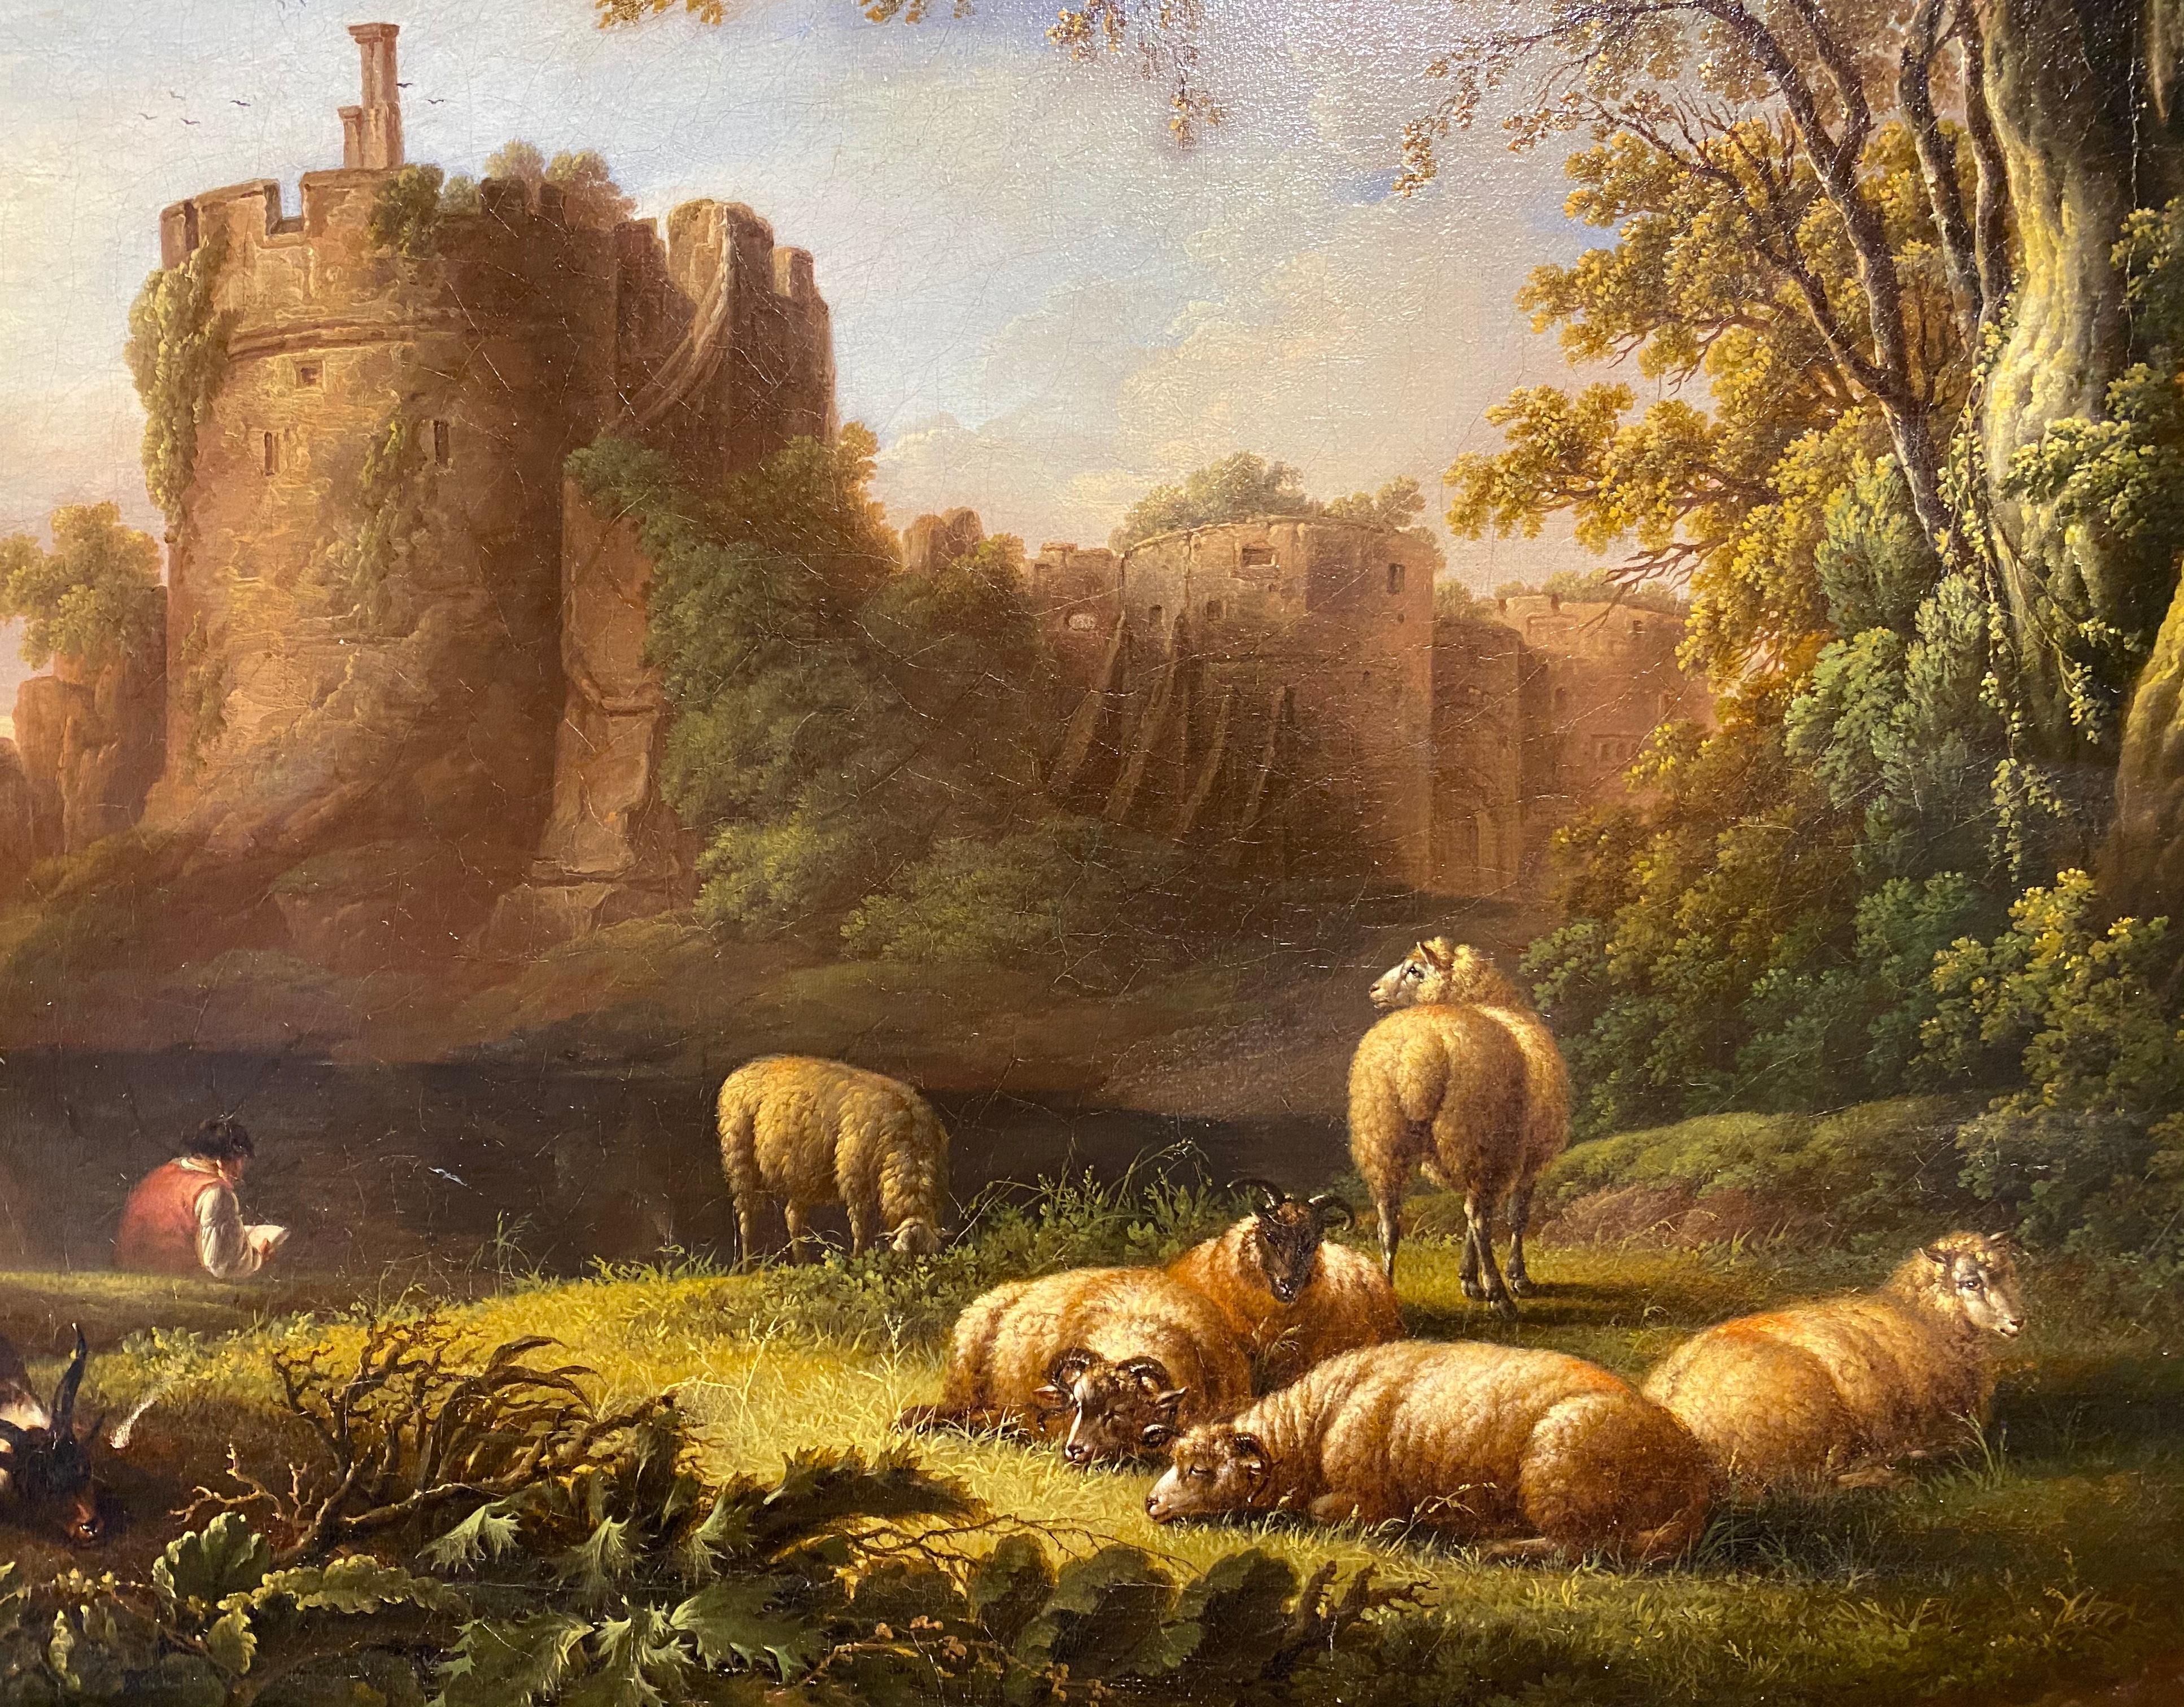 A young poet seated in a landscape before ruins, with sheep and goats resting - Brown Landscape Painting by Charles Towne